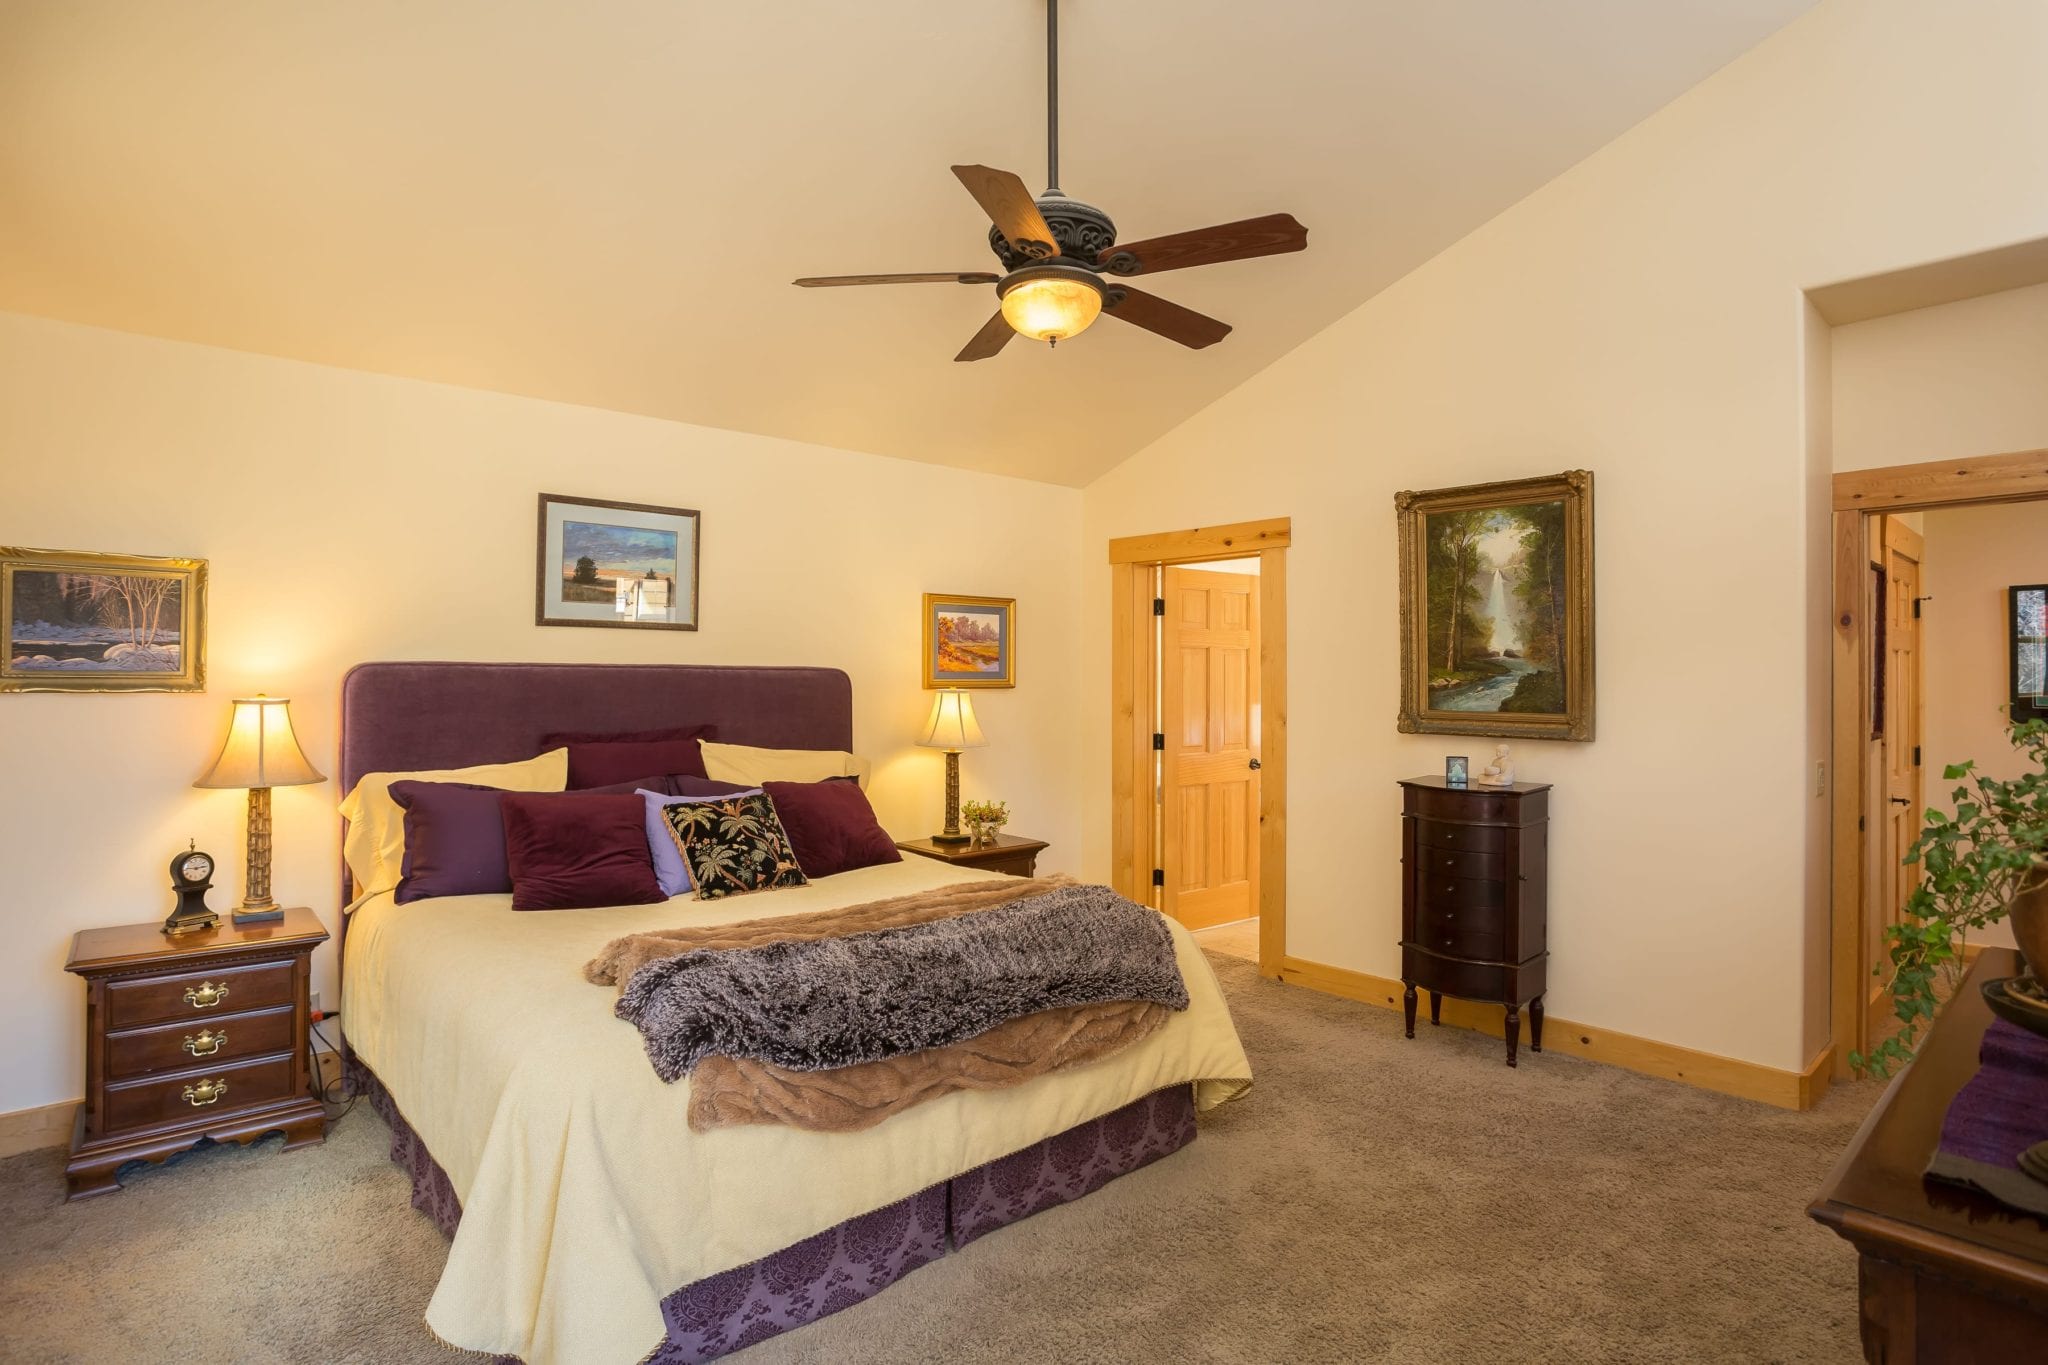 Professional Real Estate Photos Change a Buyer’s Perception